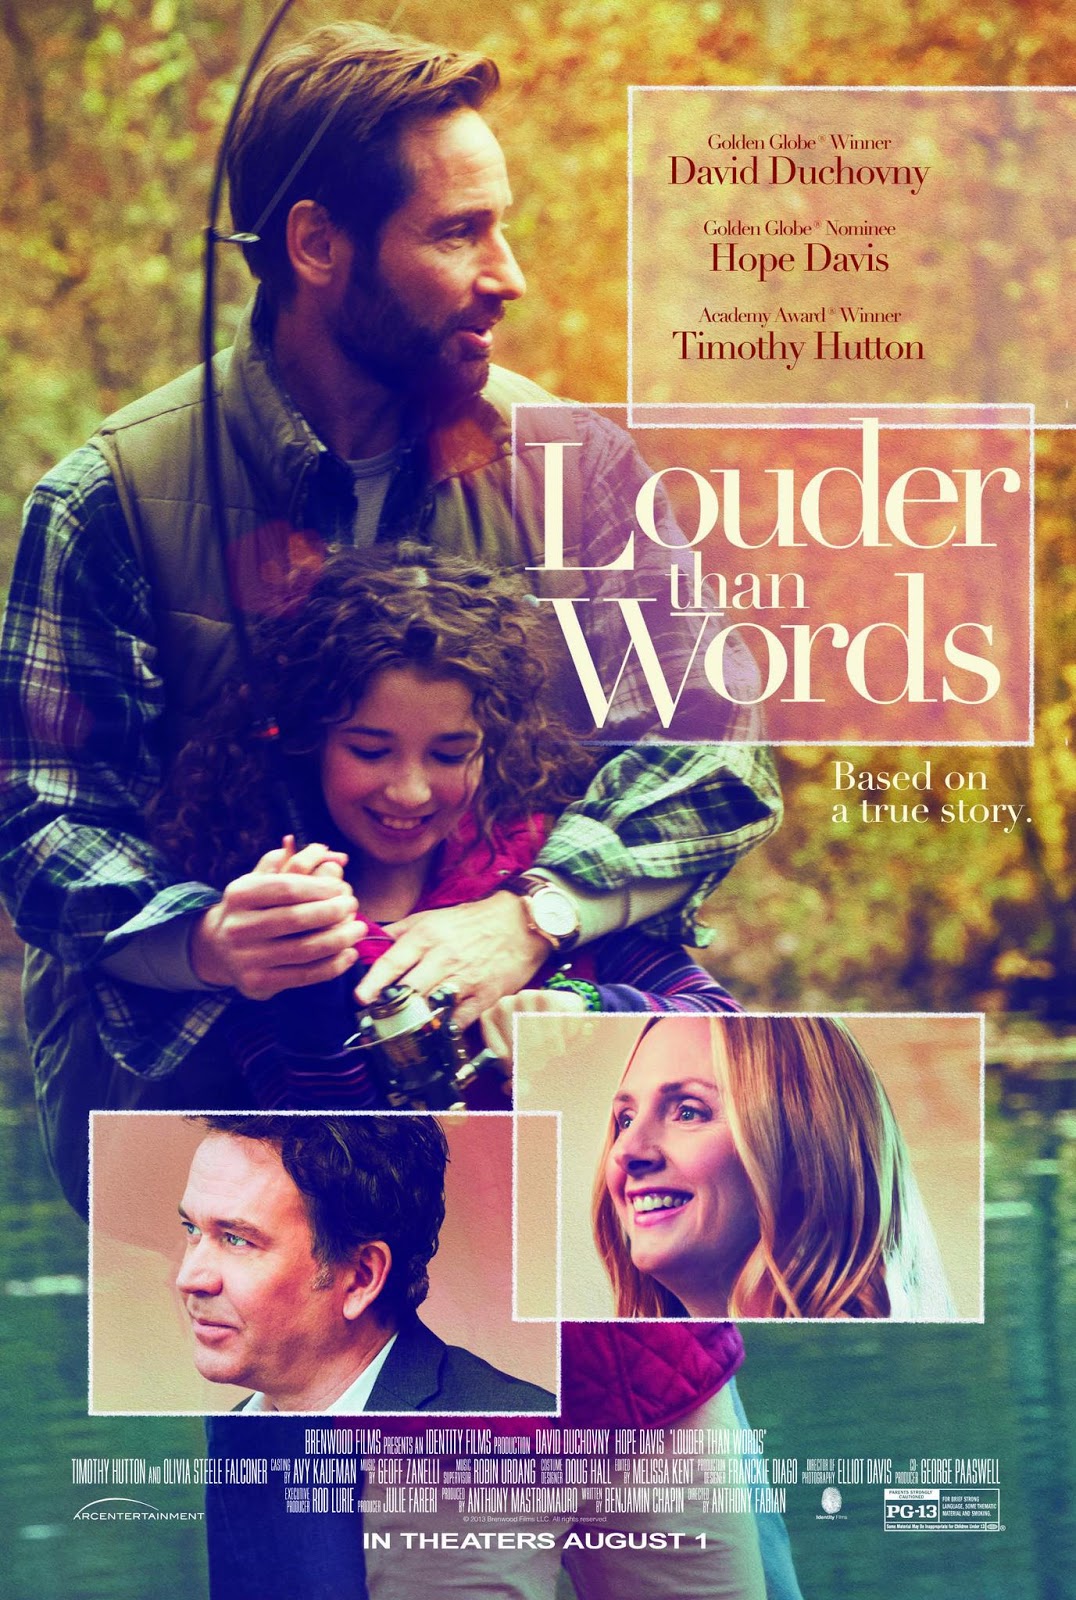 Louder Than Words 2013